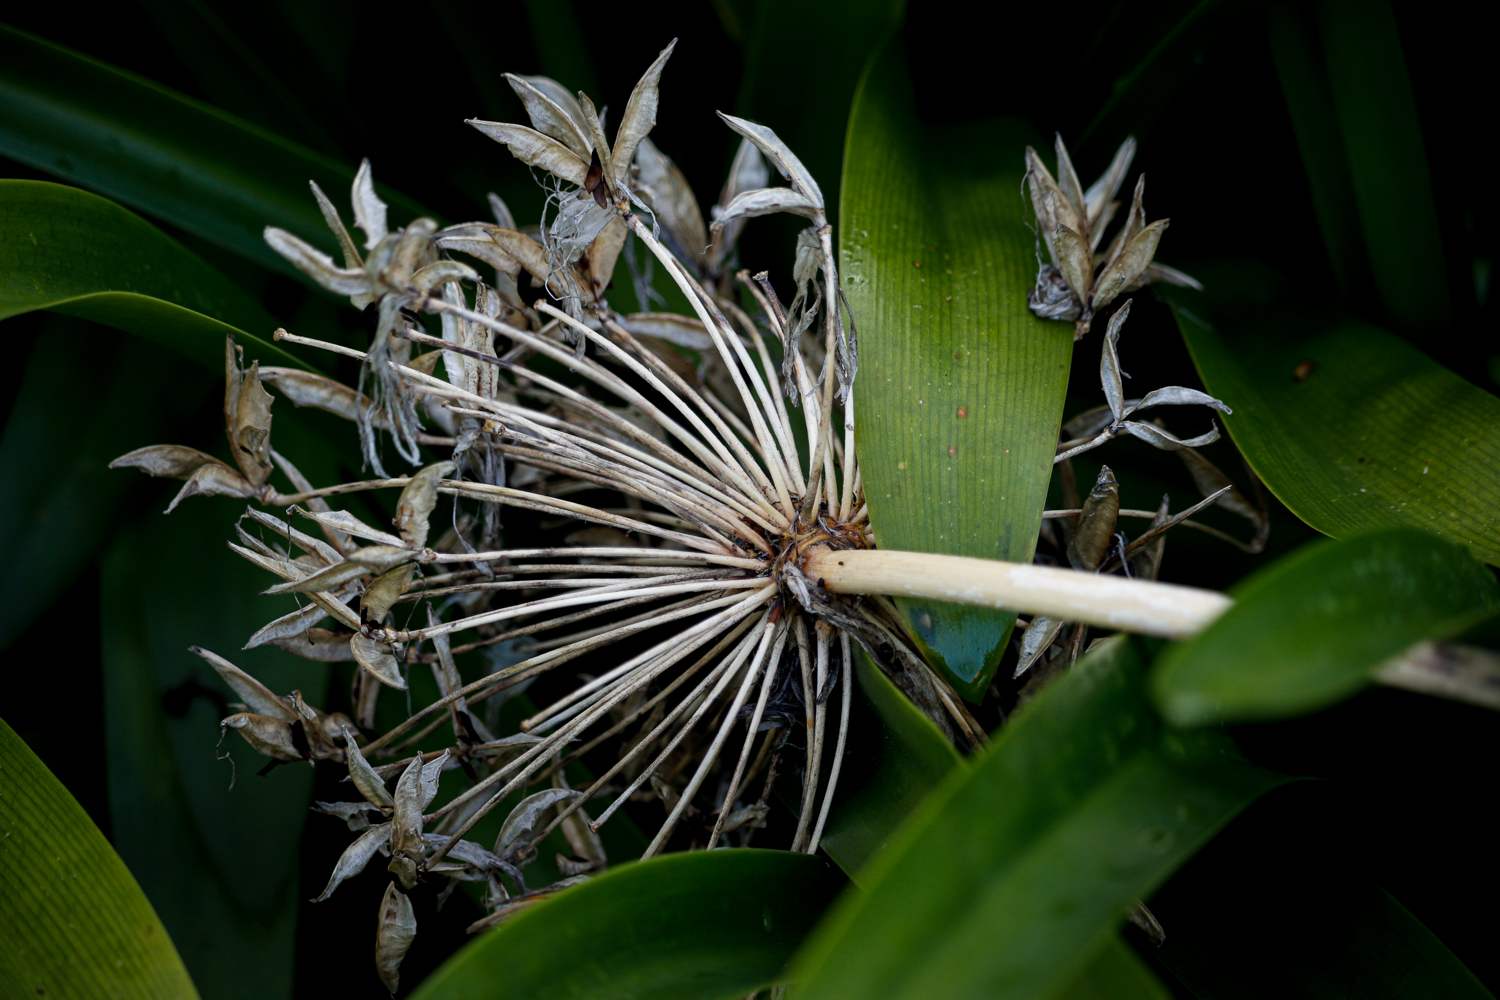 A dead agapanthus flower head in among some strappy green leaves